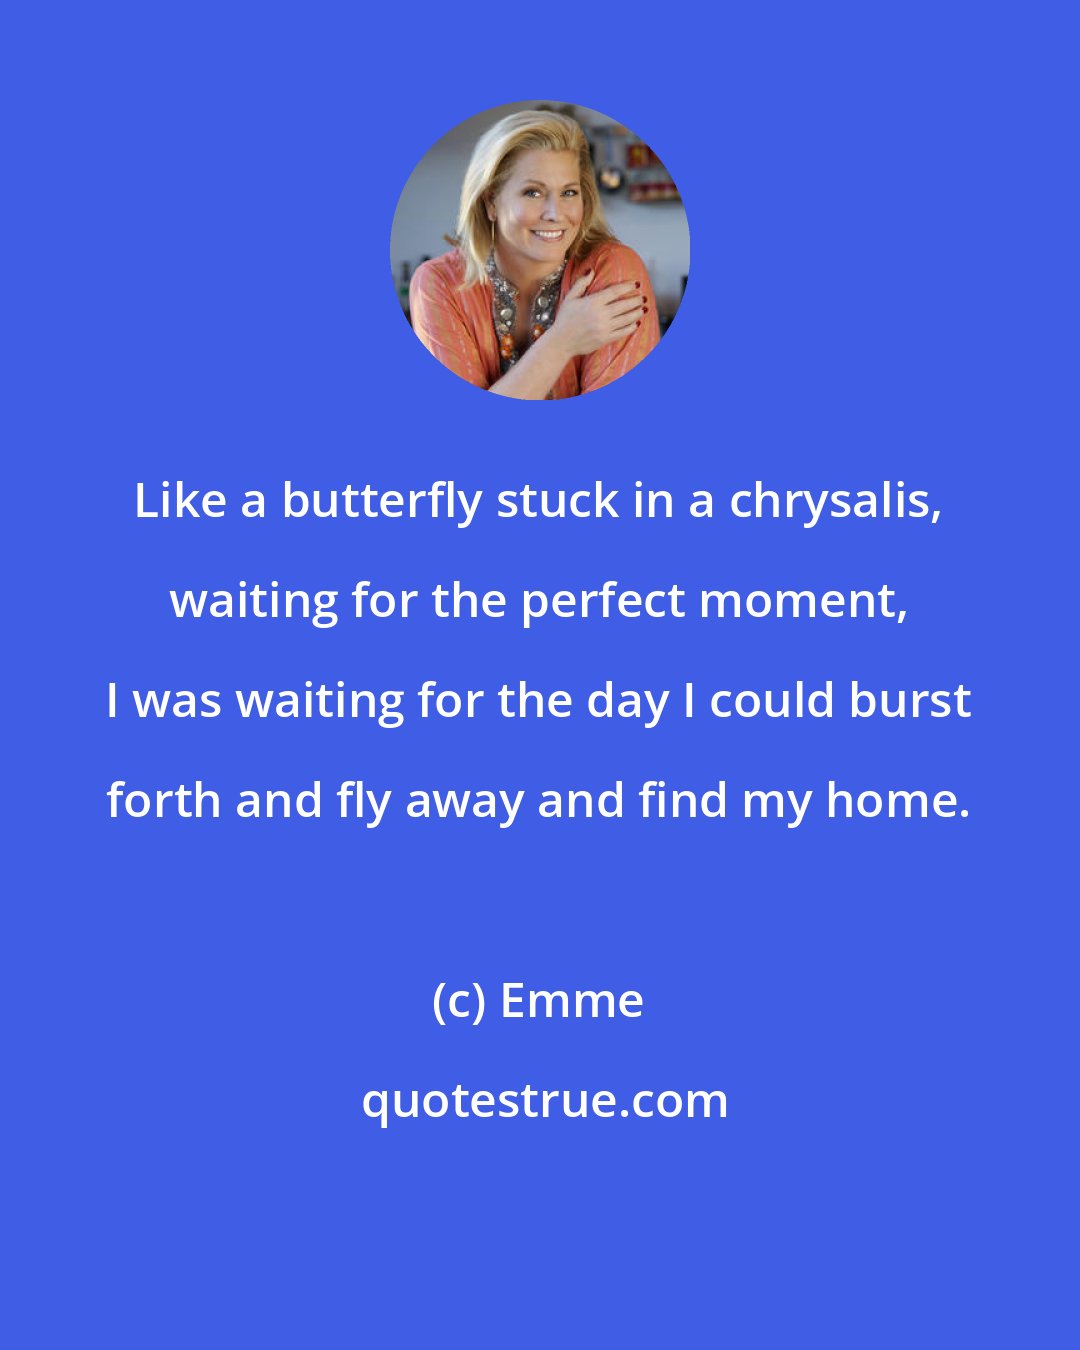 Emme: Like a butterfly stuck in a chrysalis, waiting for the perfect moment, I was waiting for the day I could burst forth and fly away and find my home.